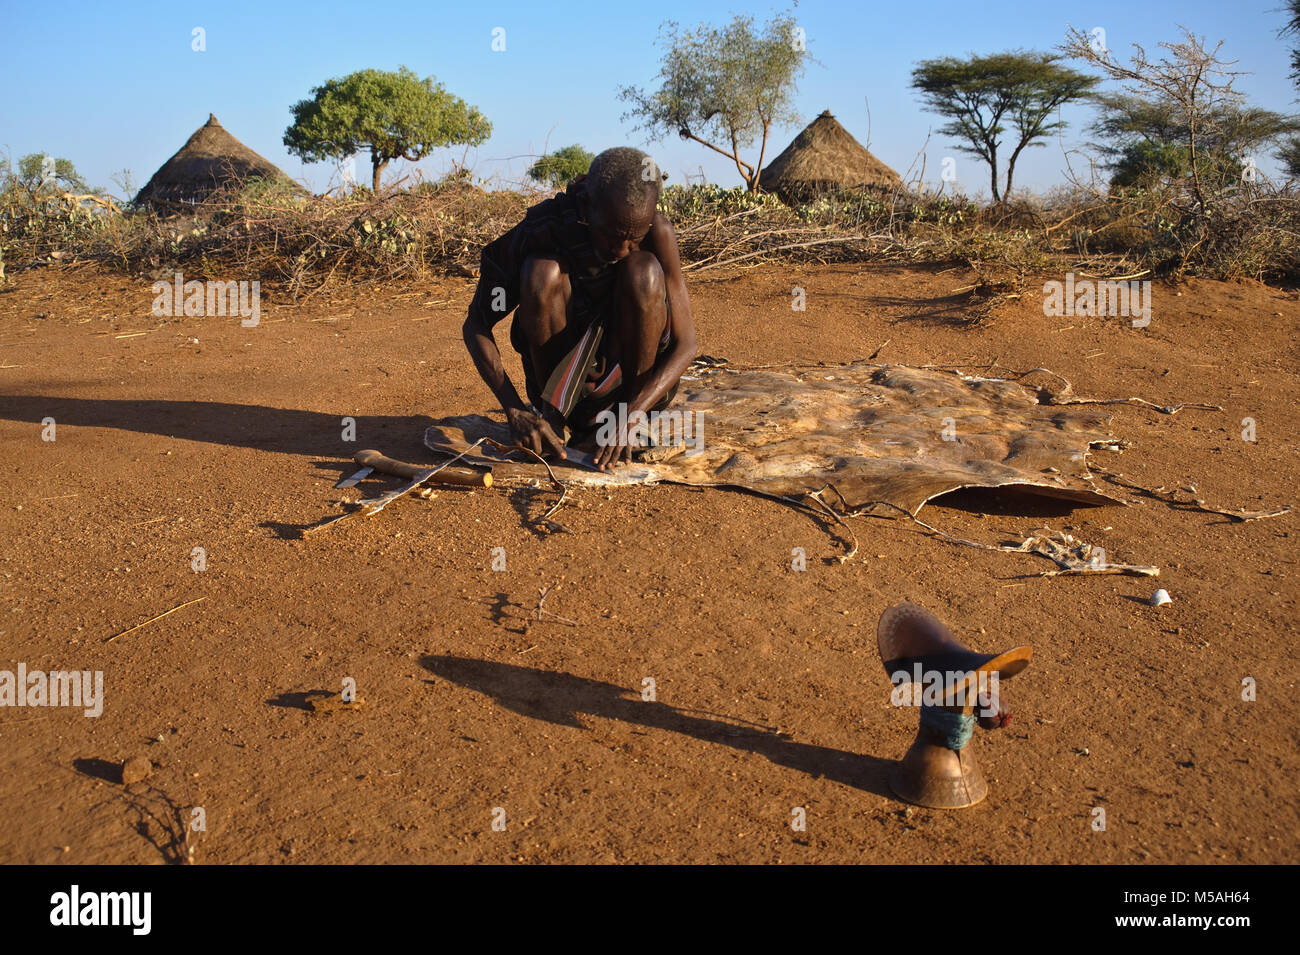 A man is tanning leather ( Ethiopia). He belongs to the Hamer tribe. Stock Photo